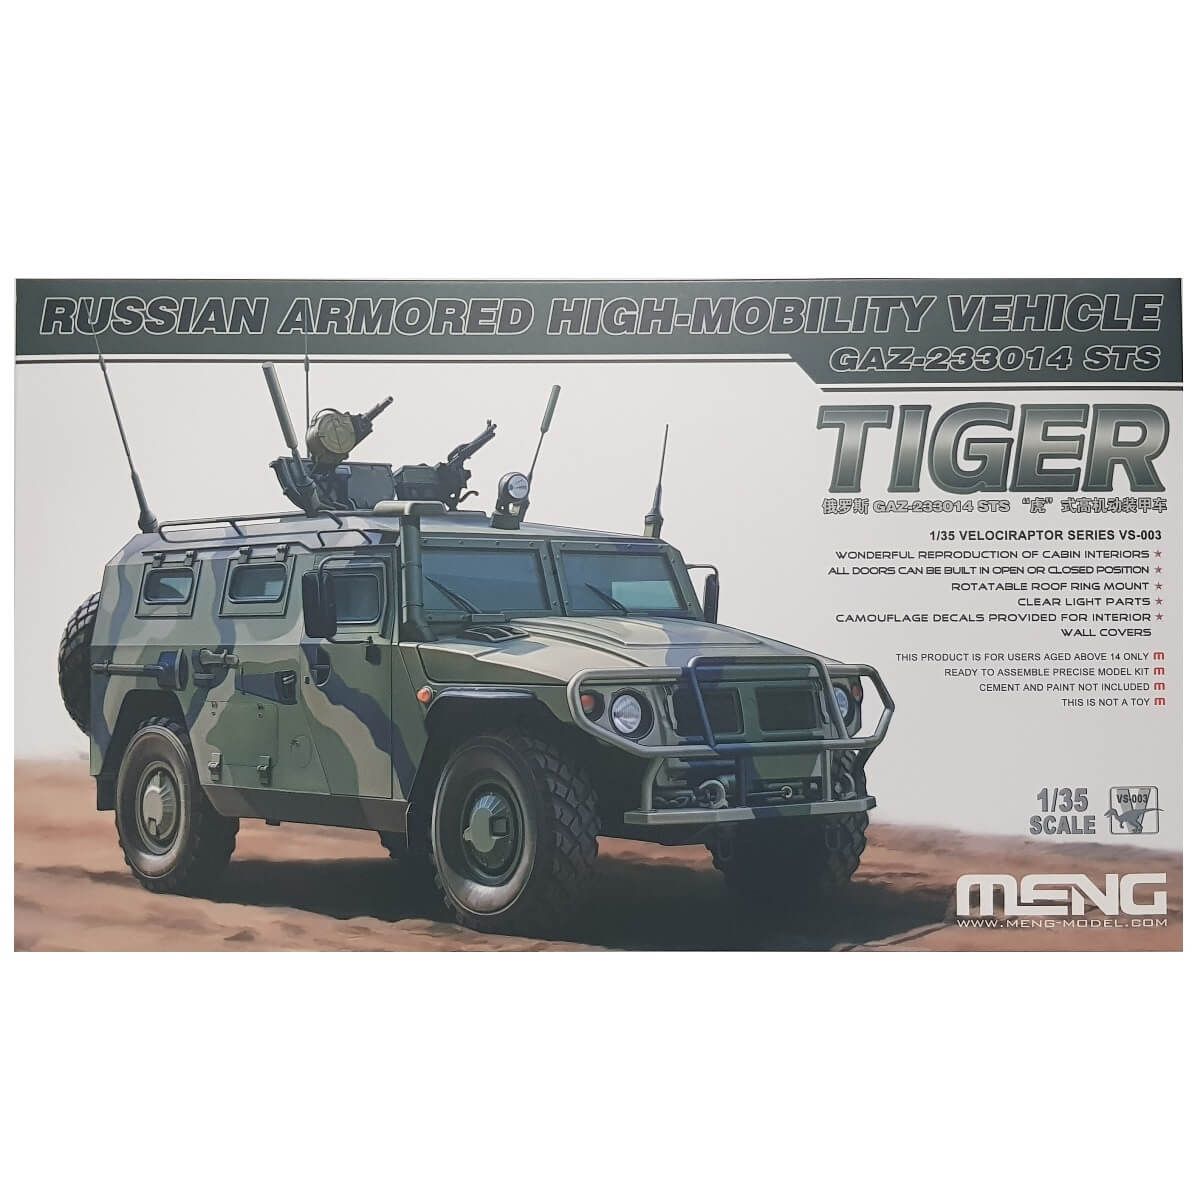 1:35 Russian Armored High-Mobility Vehicle - GAZ-233014 STS Tiger - MENG